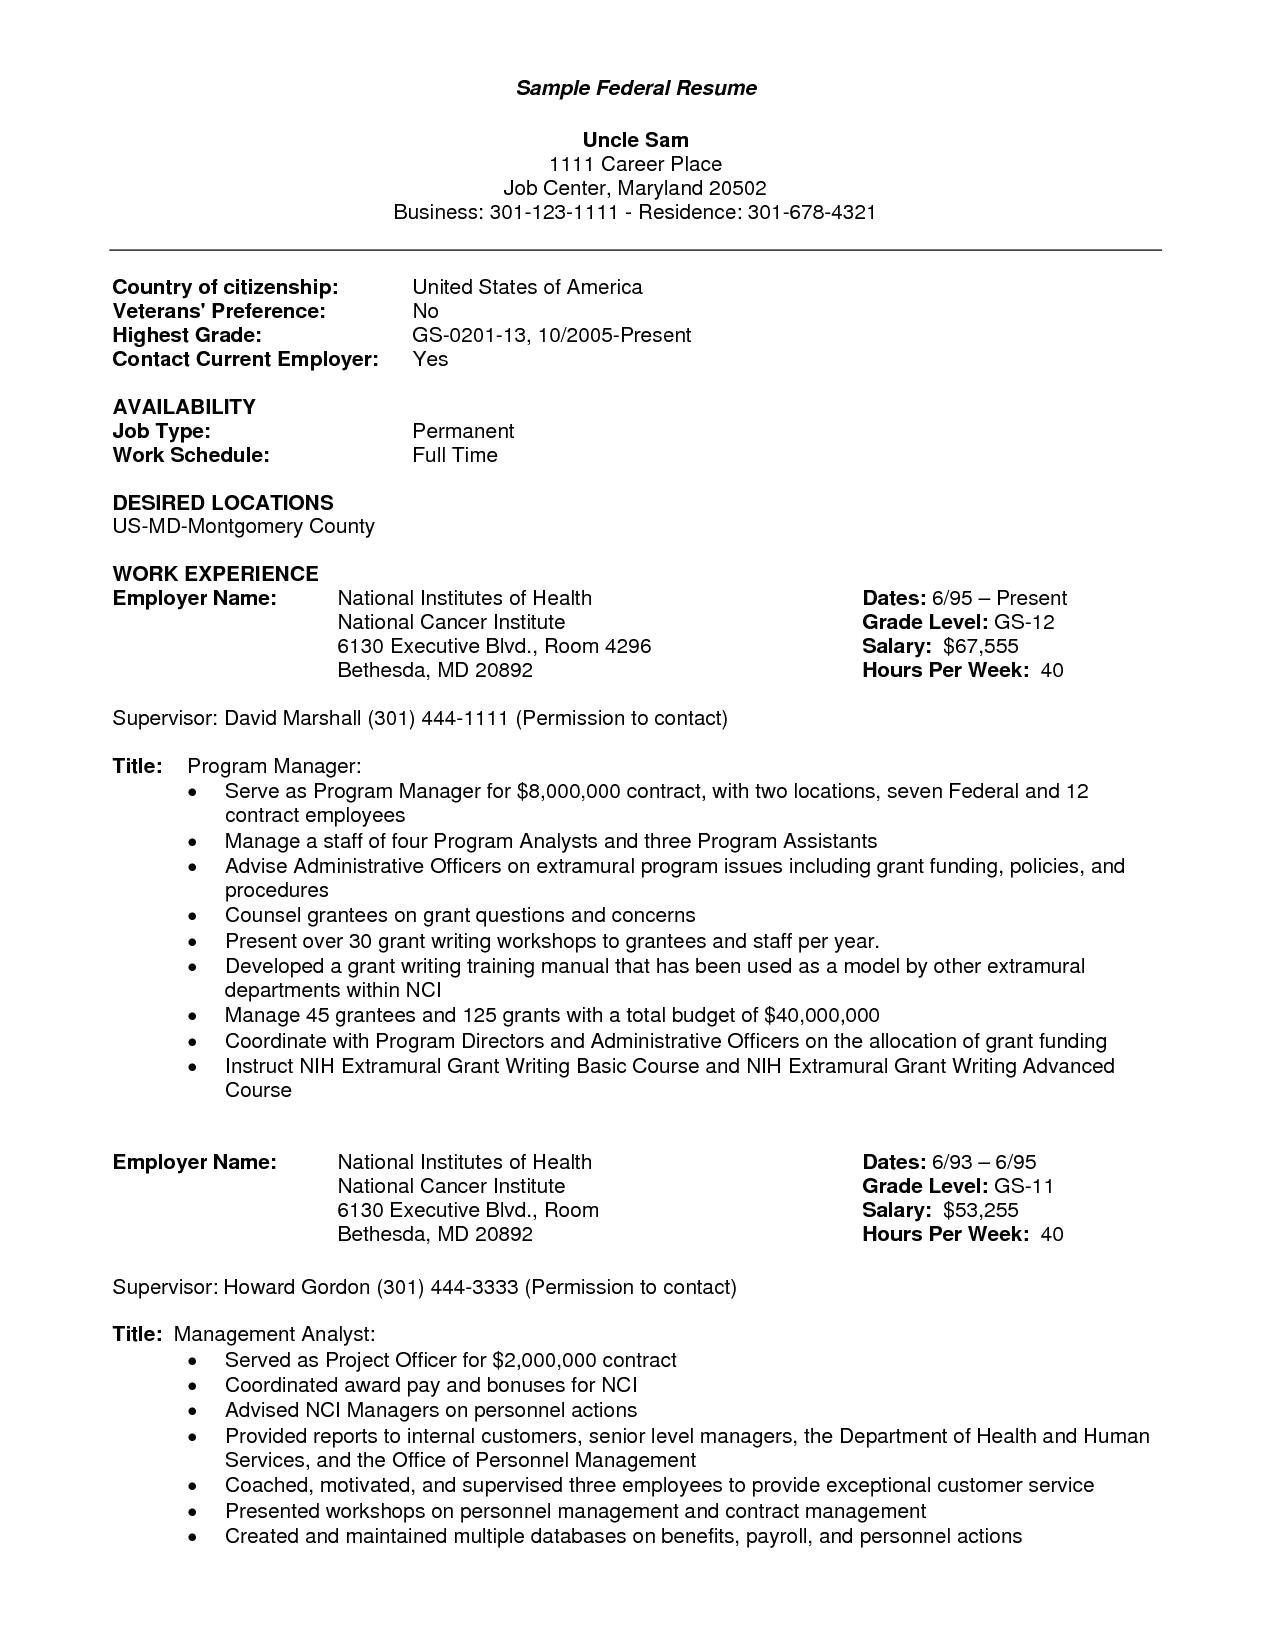 date of availability resume sample inspirational resume examples for government jobs